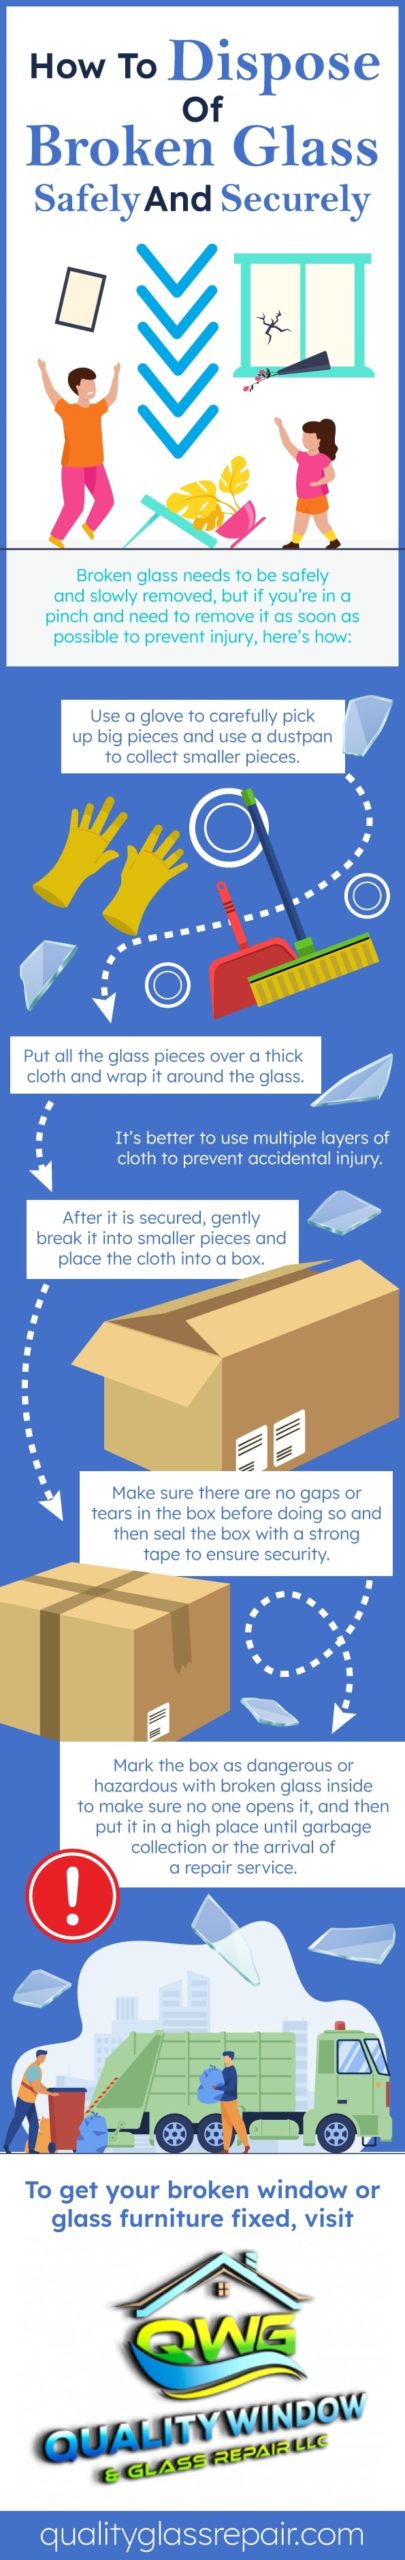 Quality Glass Repair Infographic